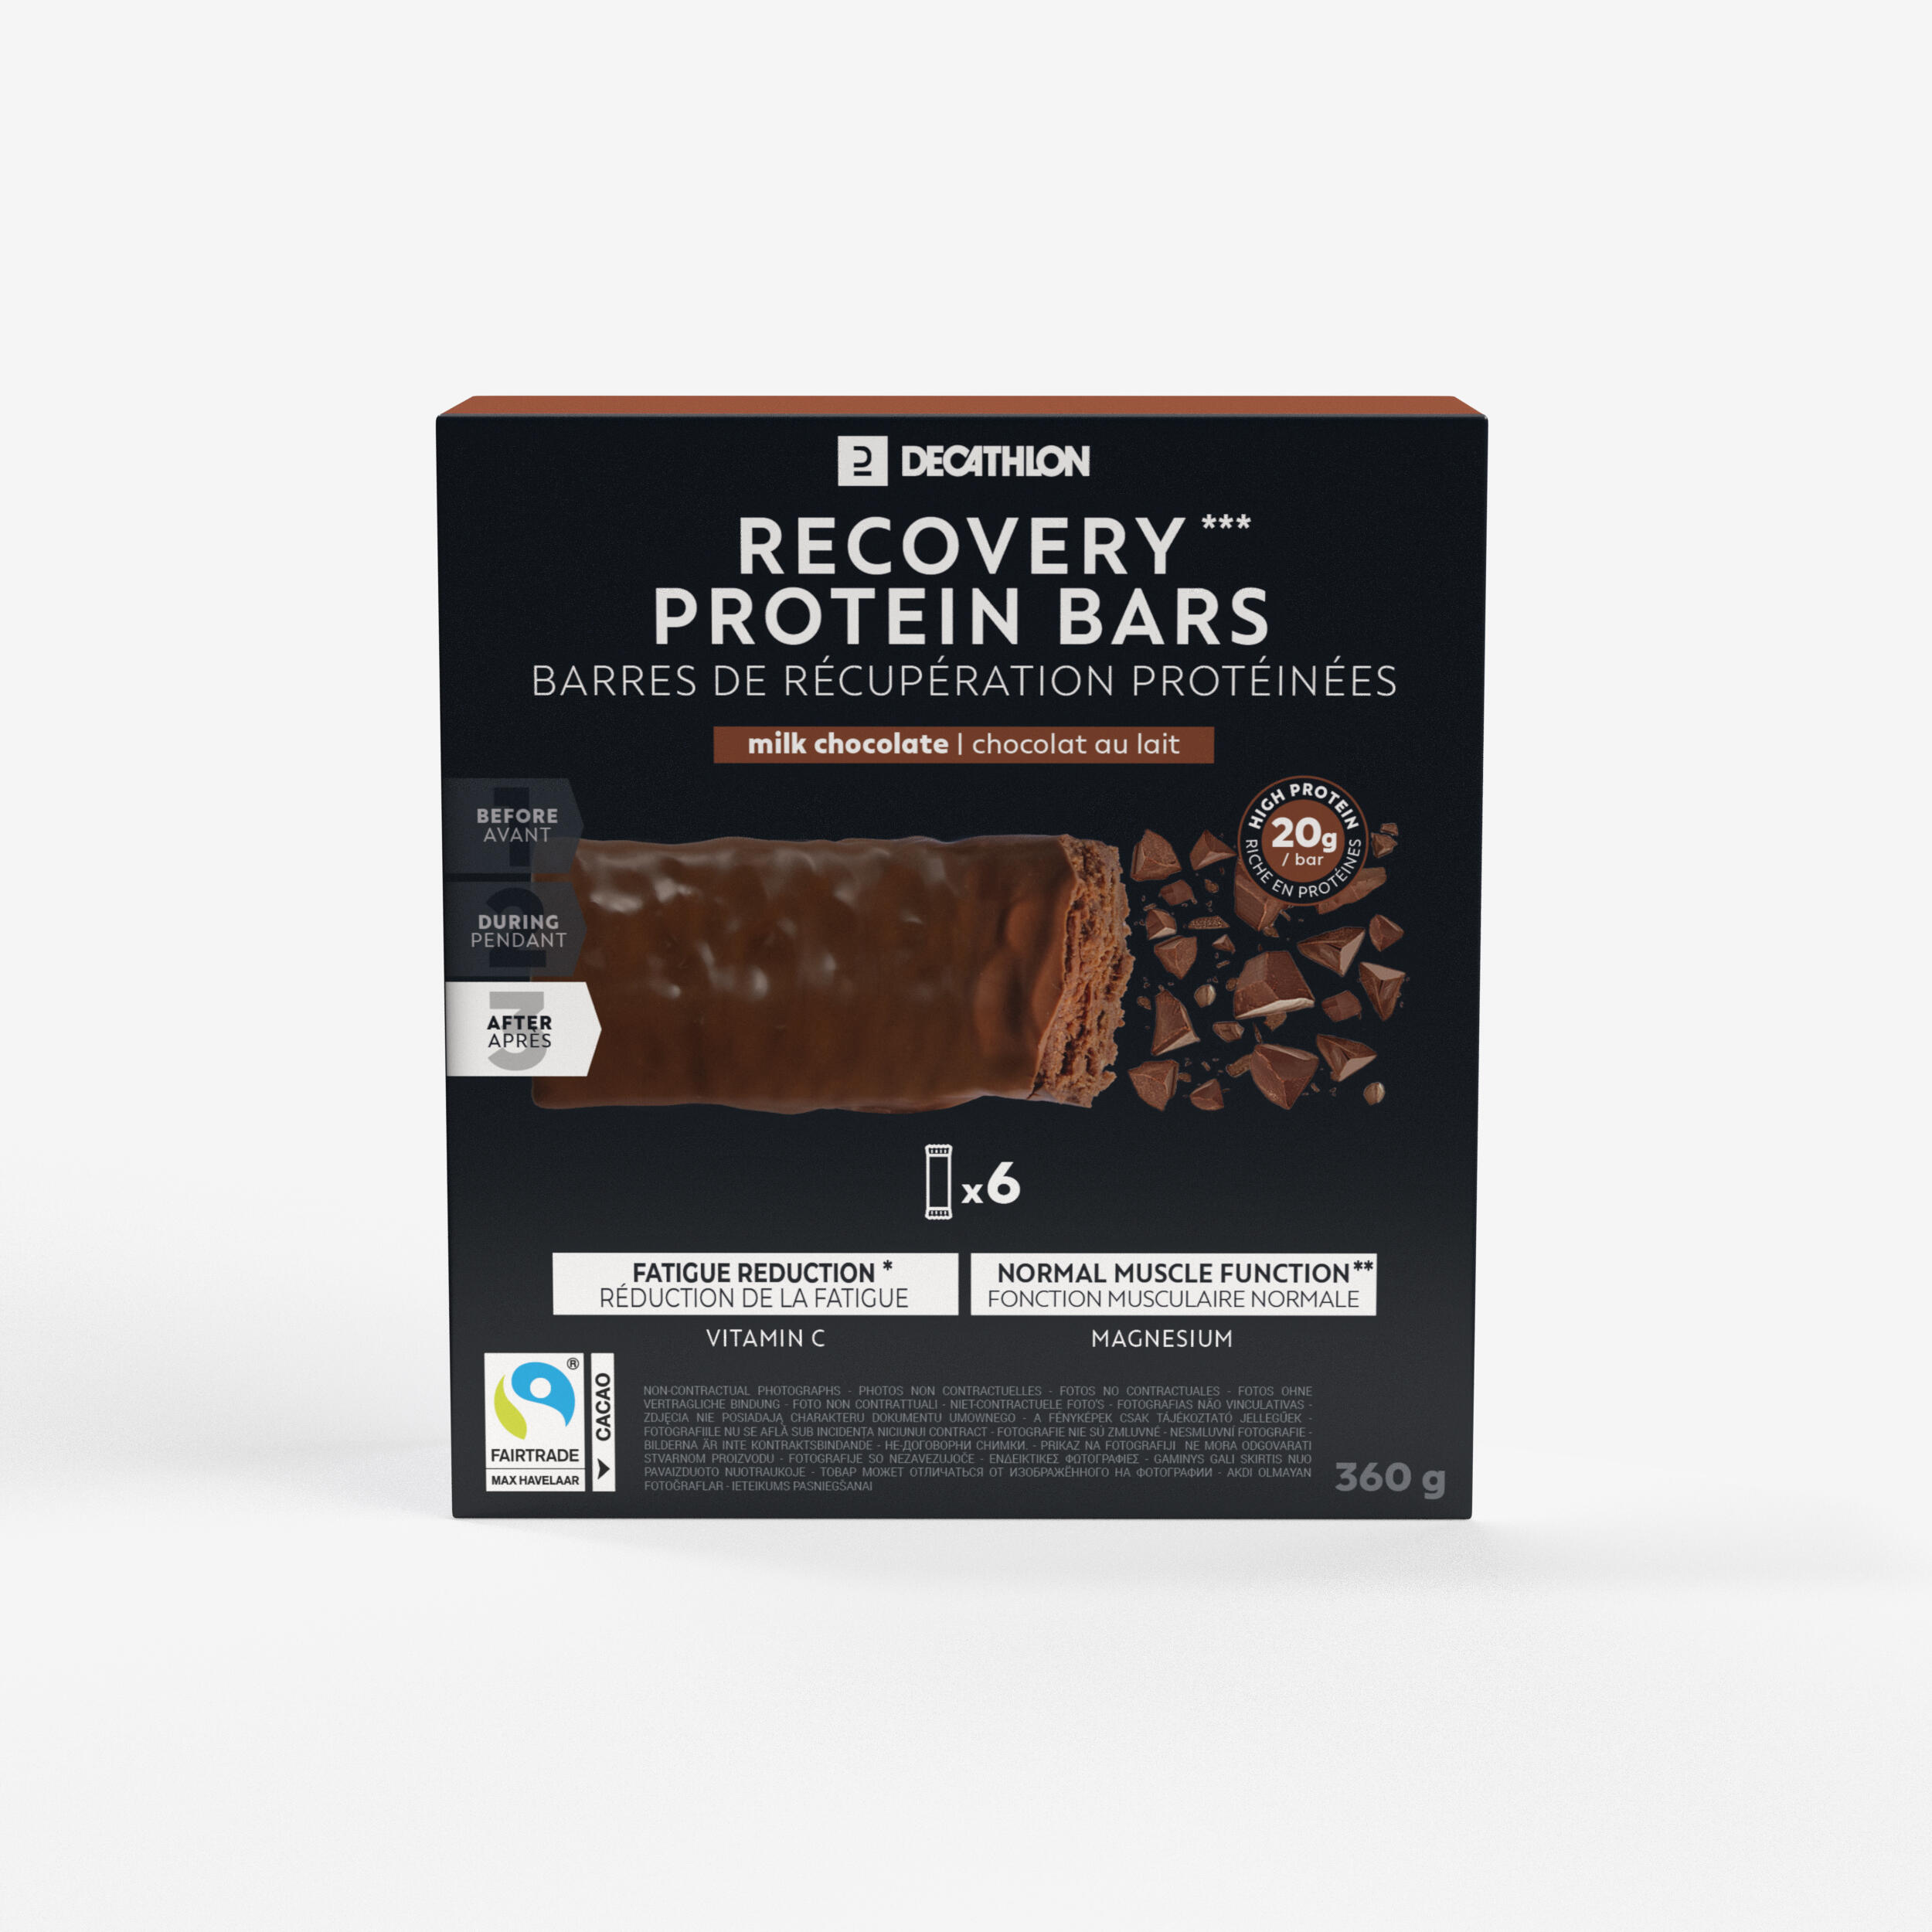 DECATHLON Recovery Protein Bar *6 Chocolate